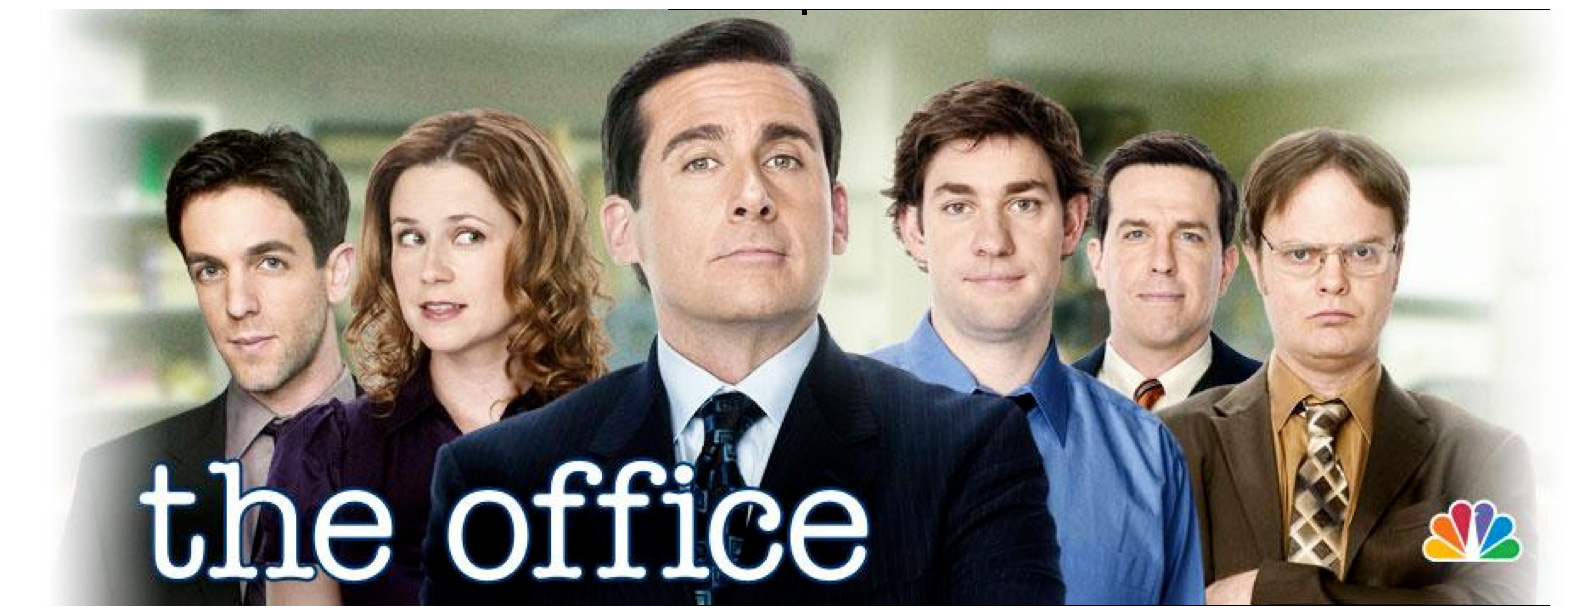 The Office (US) #16